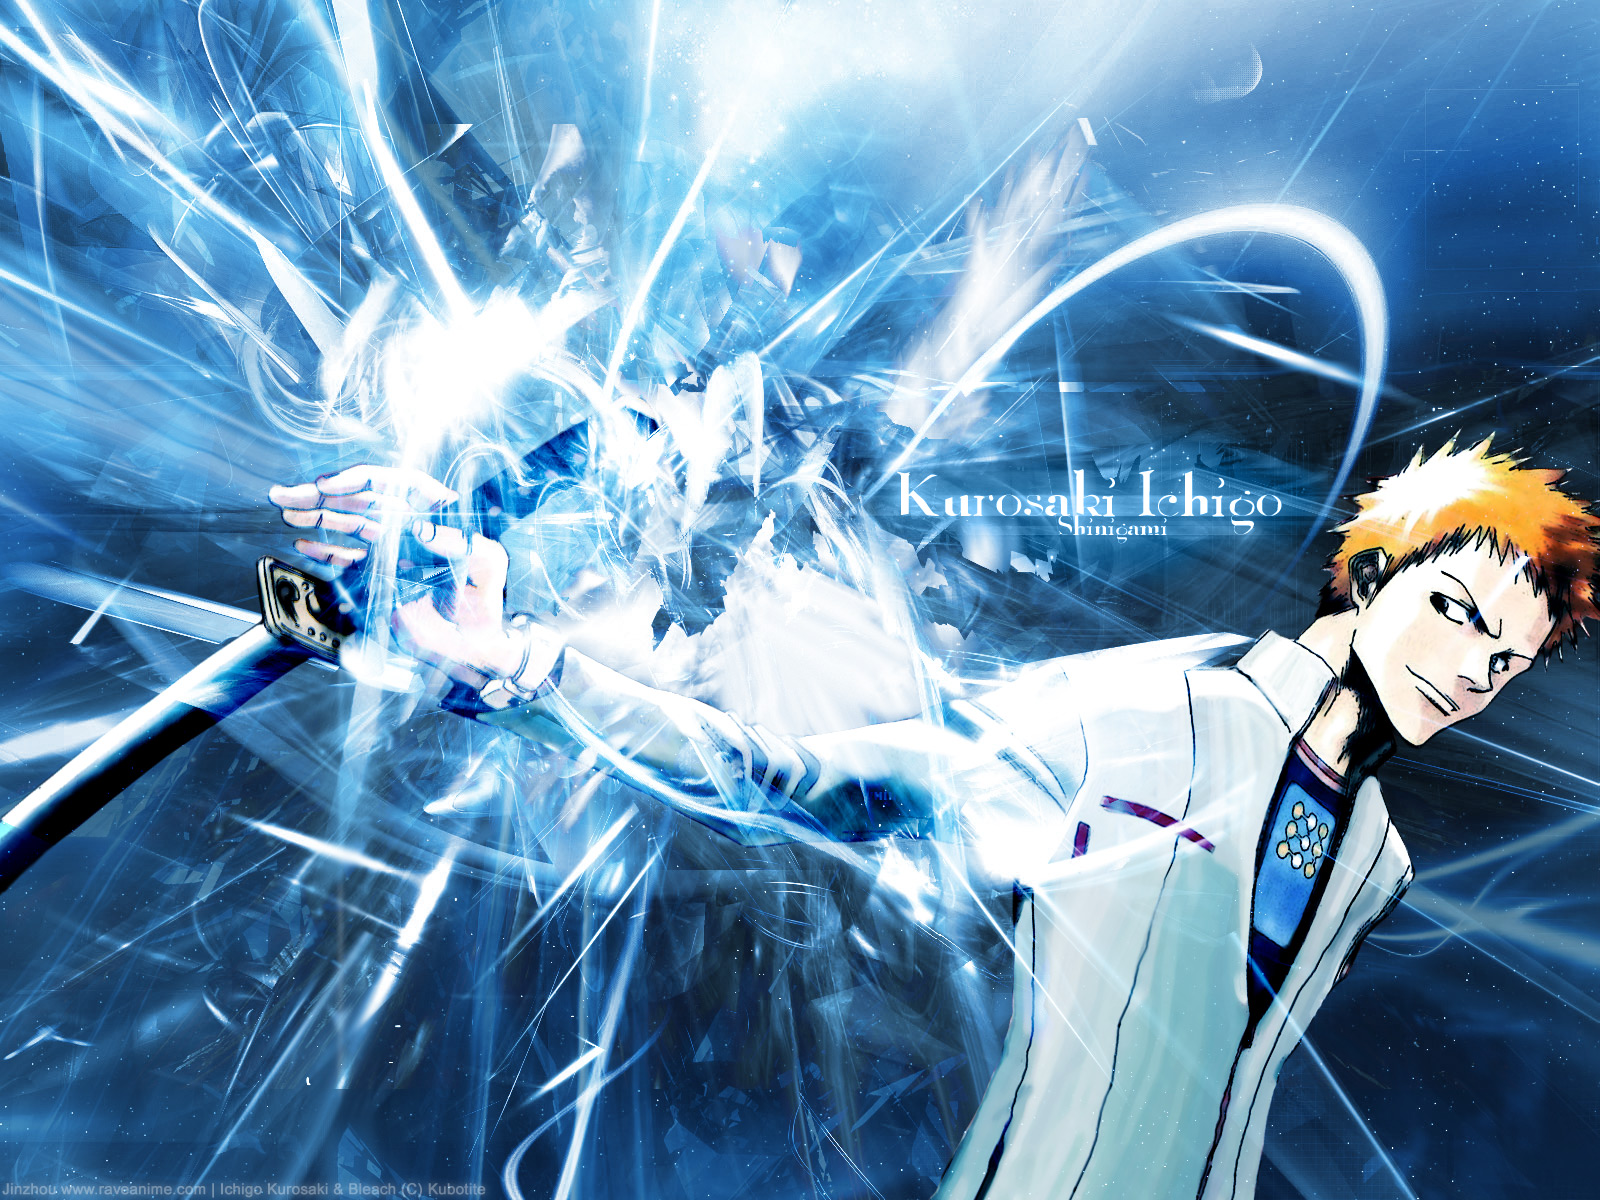 Bleach HD Wallpapers (73+ images)